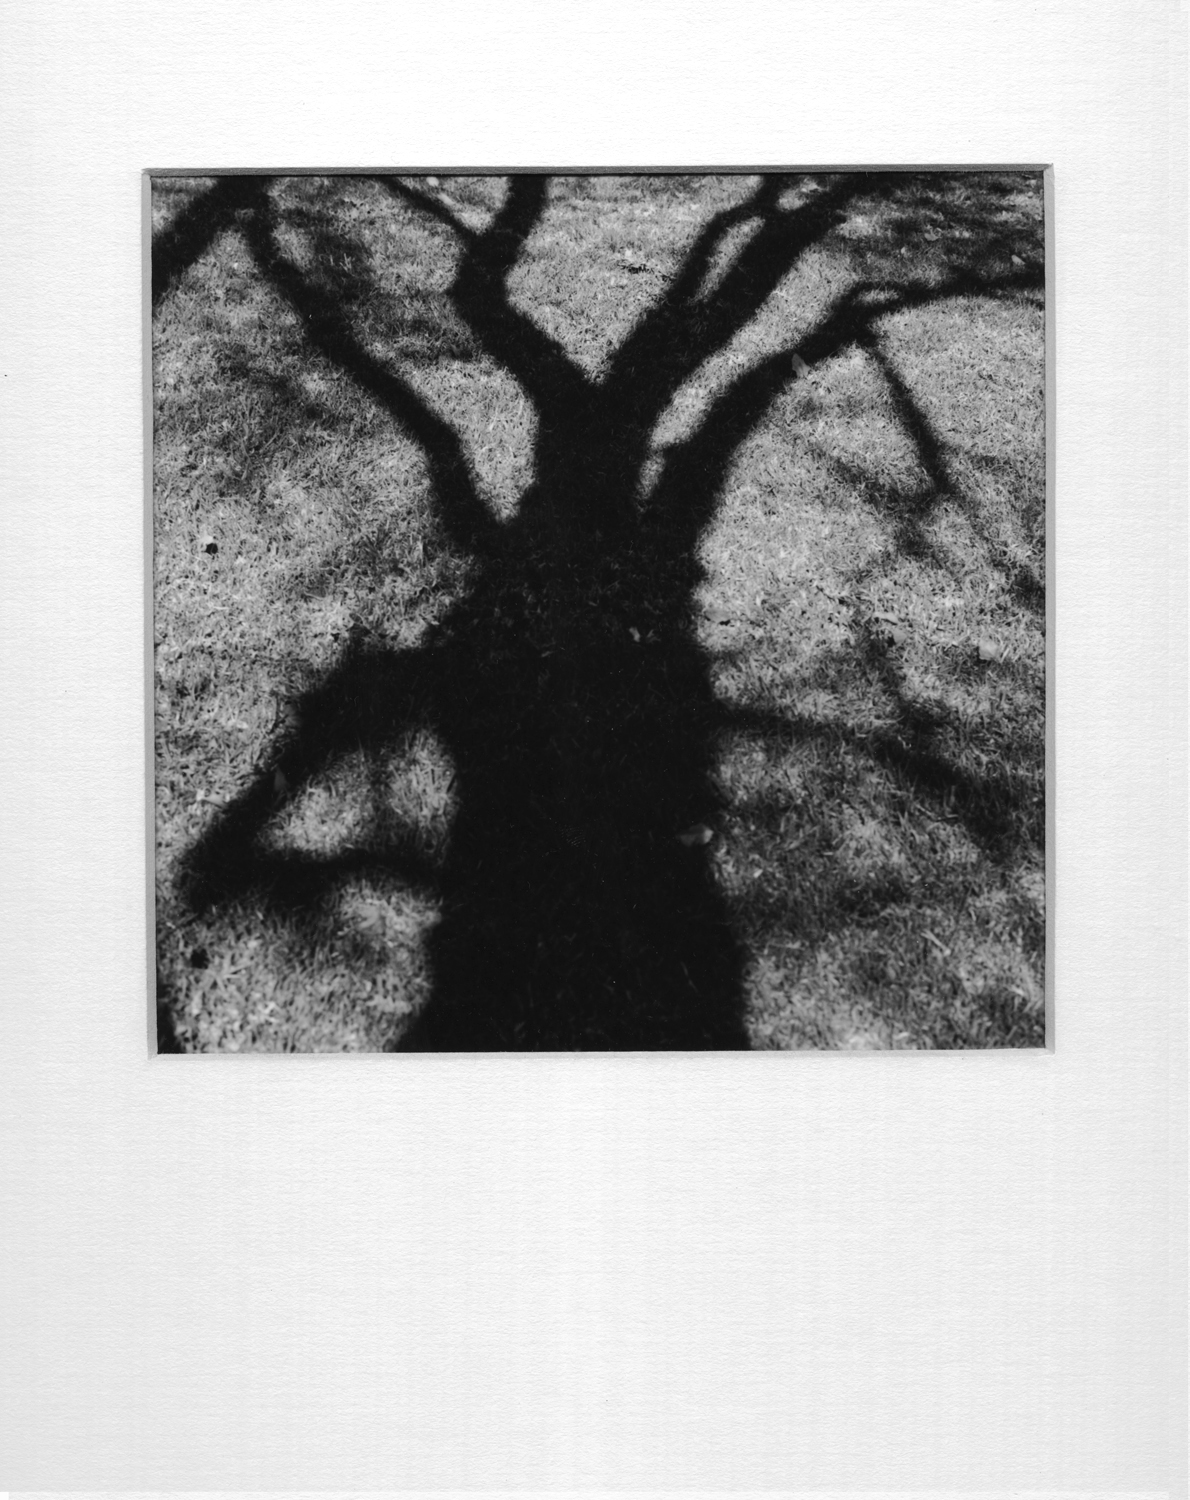 Lindsey Best trees Shadows Shadows As Subjects Nature black and white darkroom prints rolleiflex Hasselblad